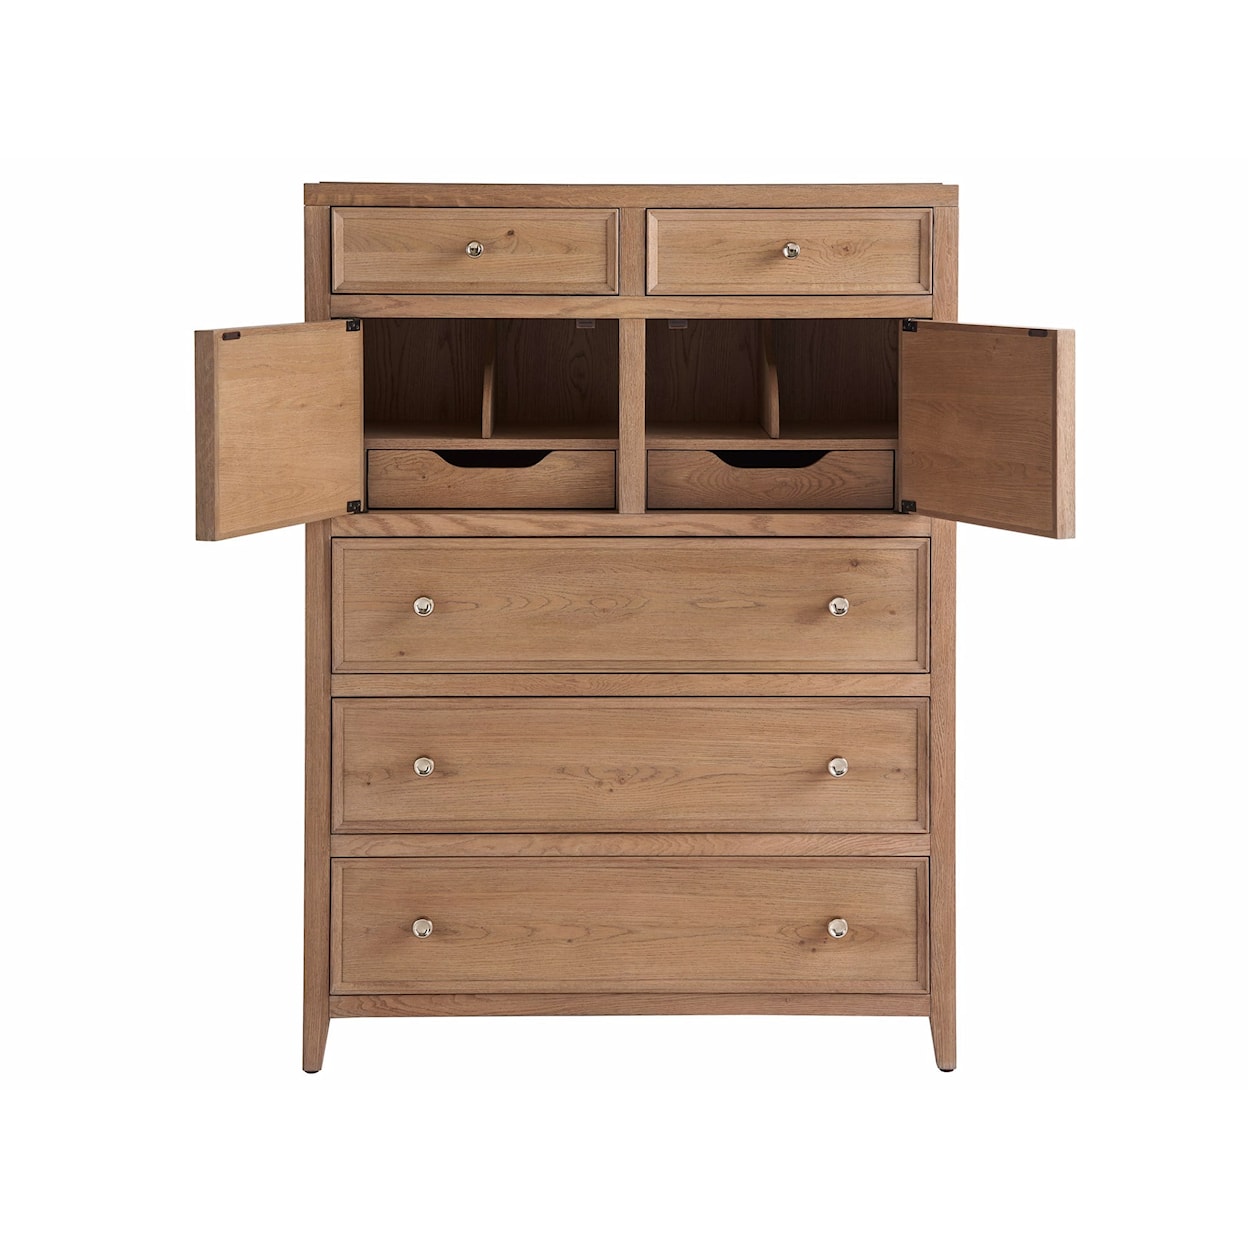 Universal Weekender Coastal Living Home Collection Bedroom Chest